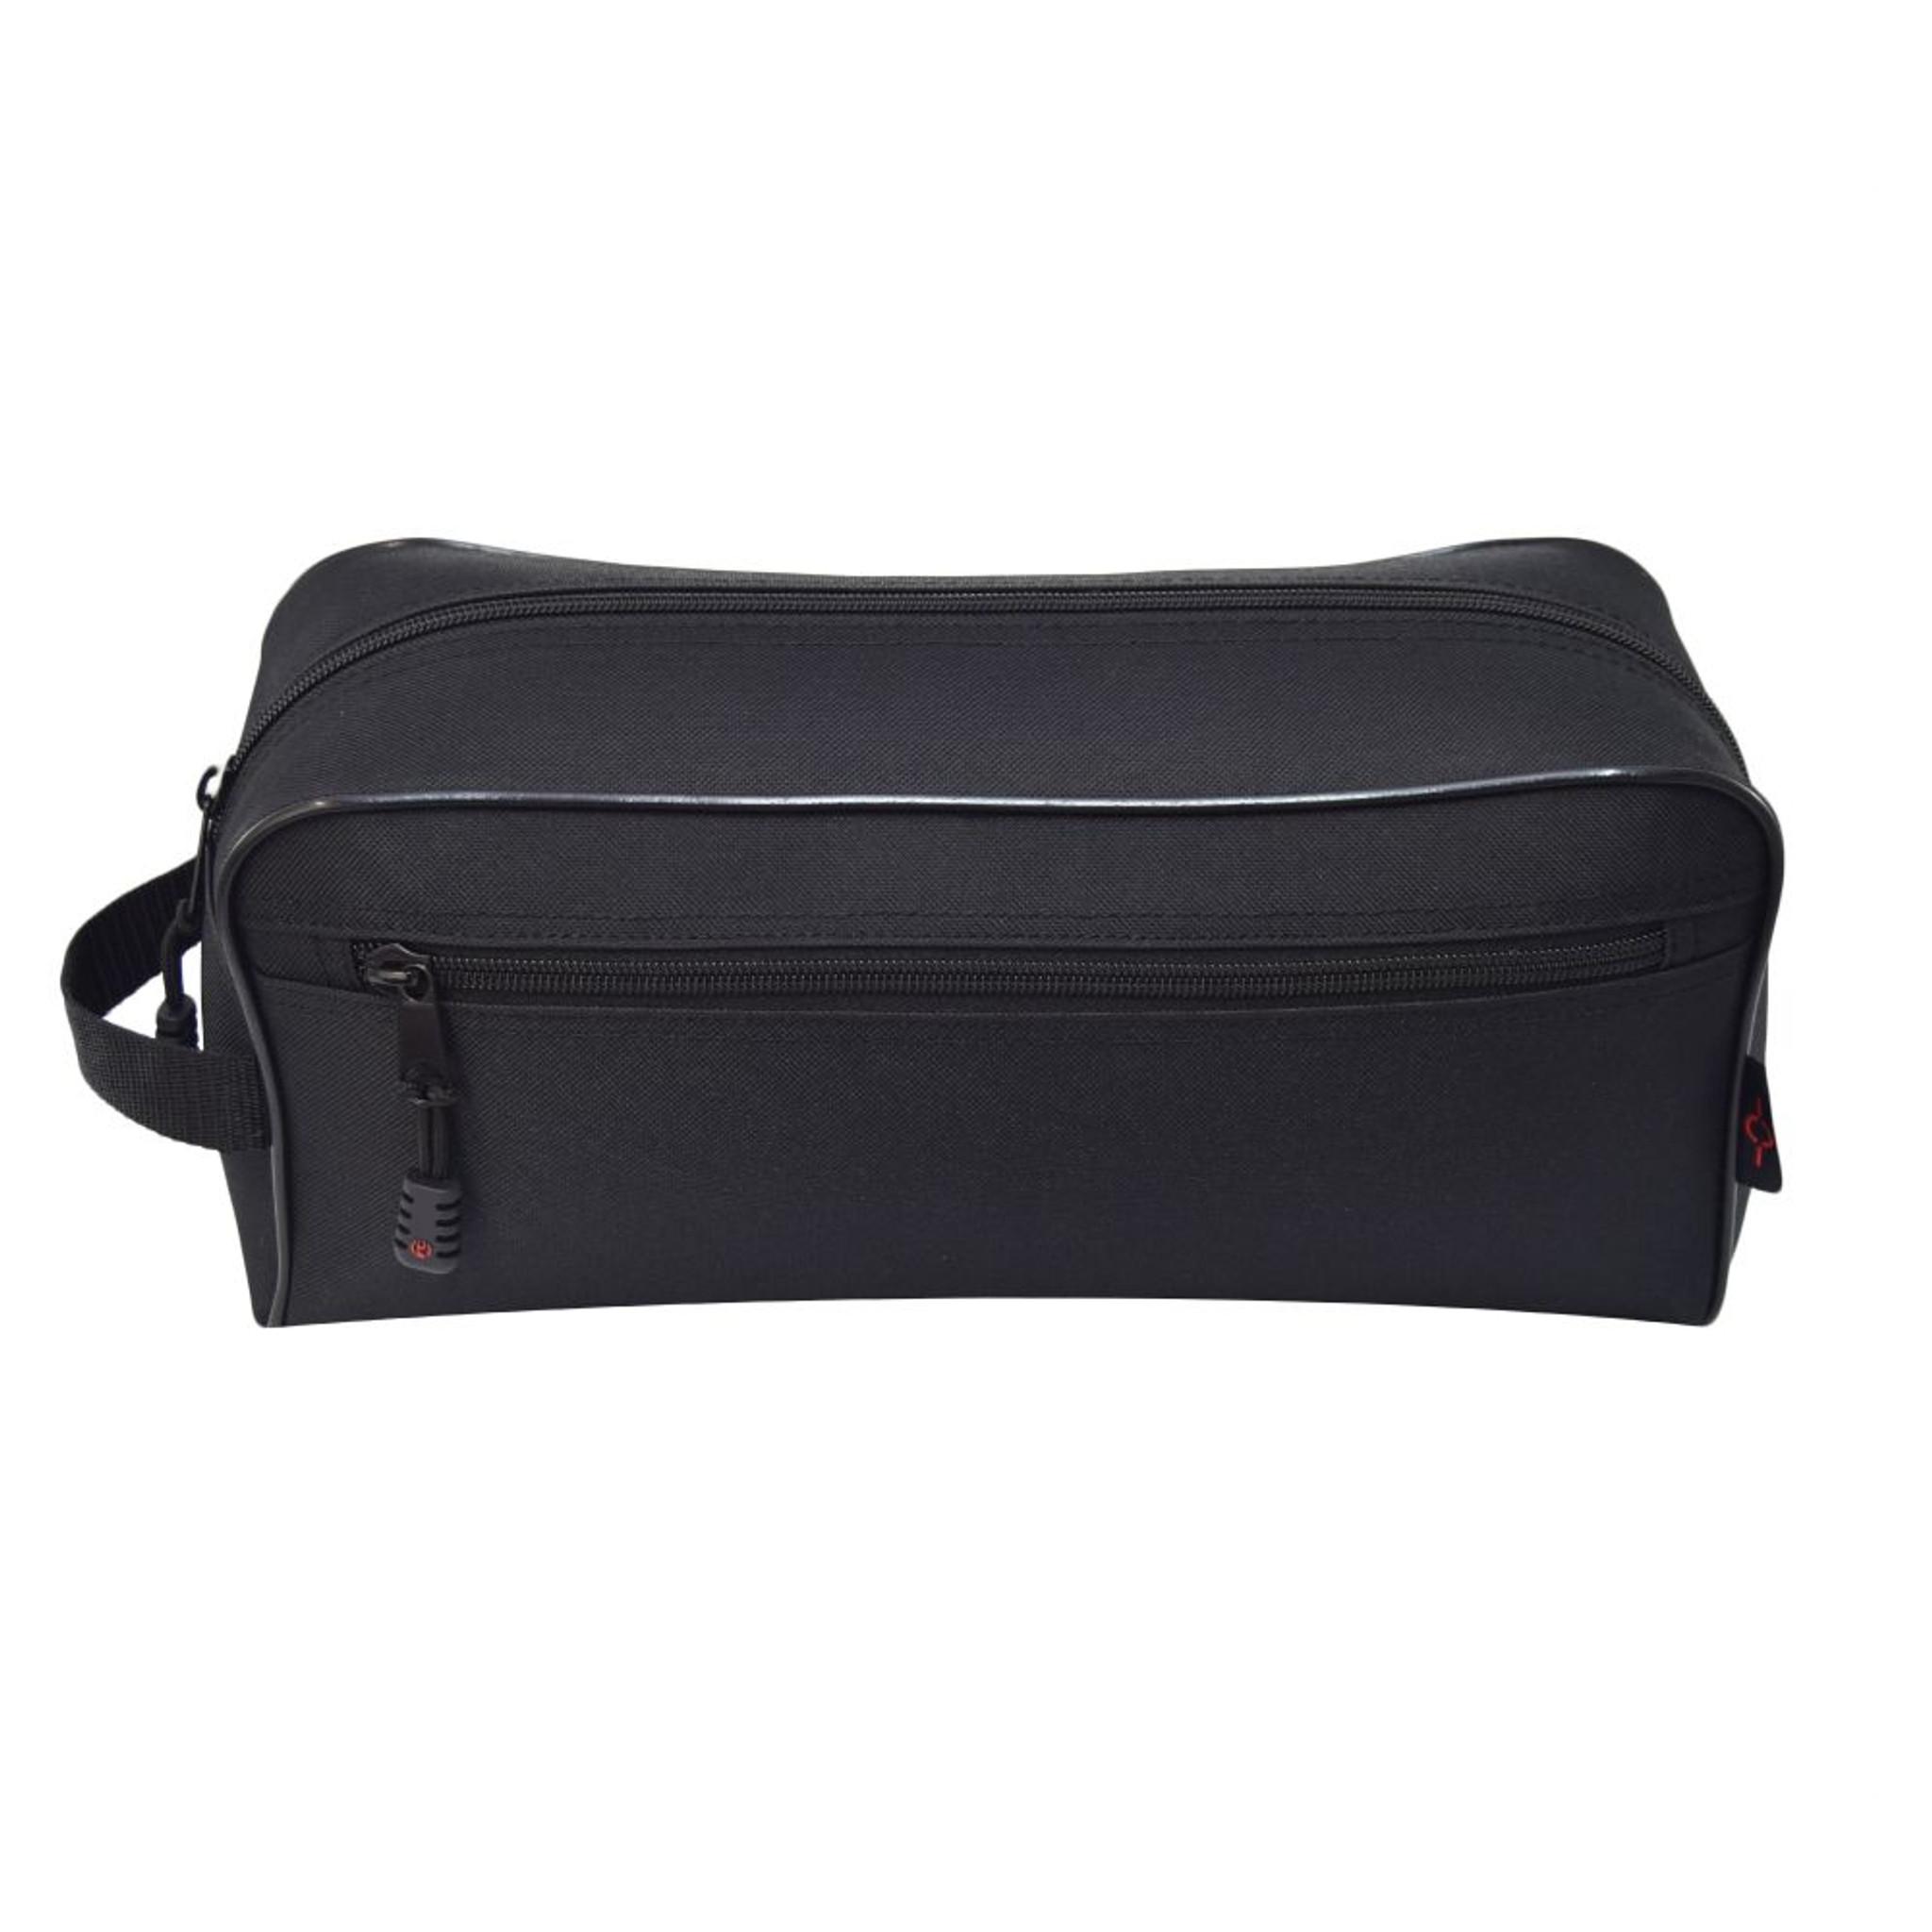 LARGE TOILETRY BAG - Flying Circle Gear